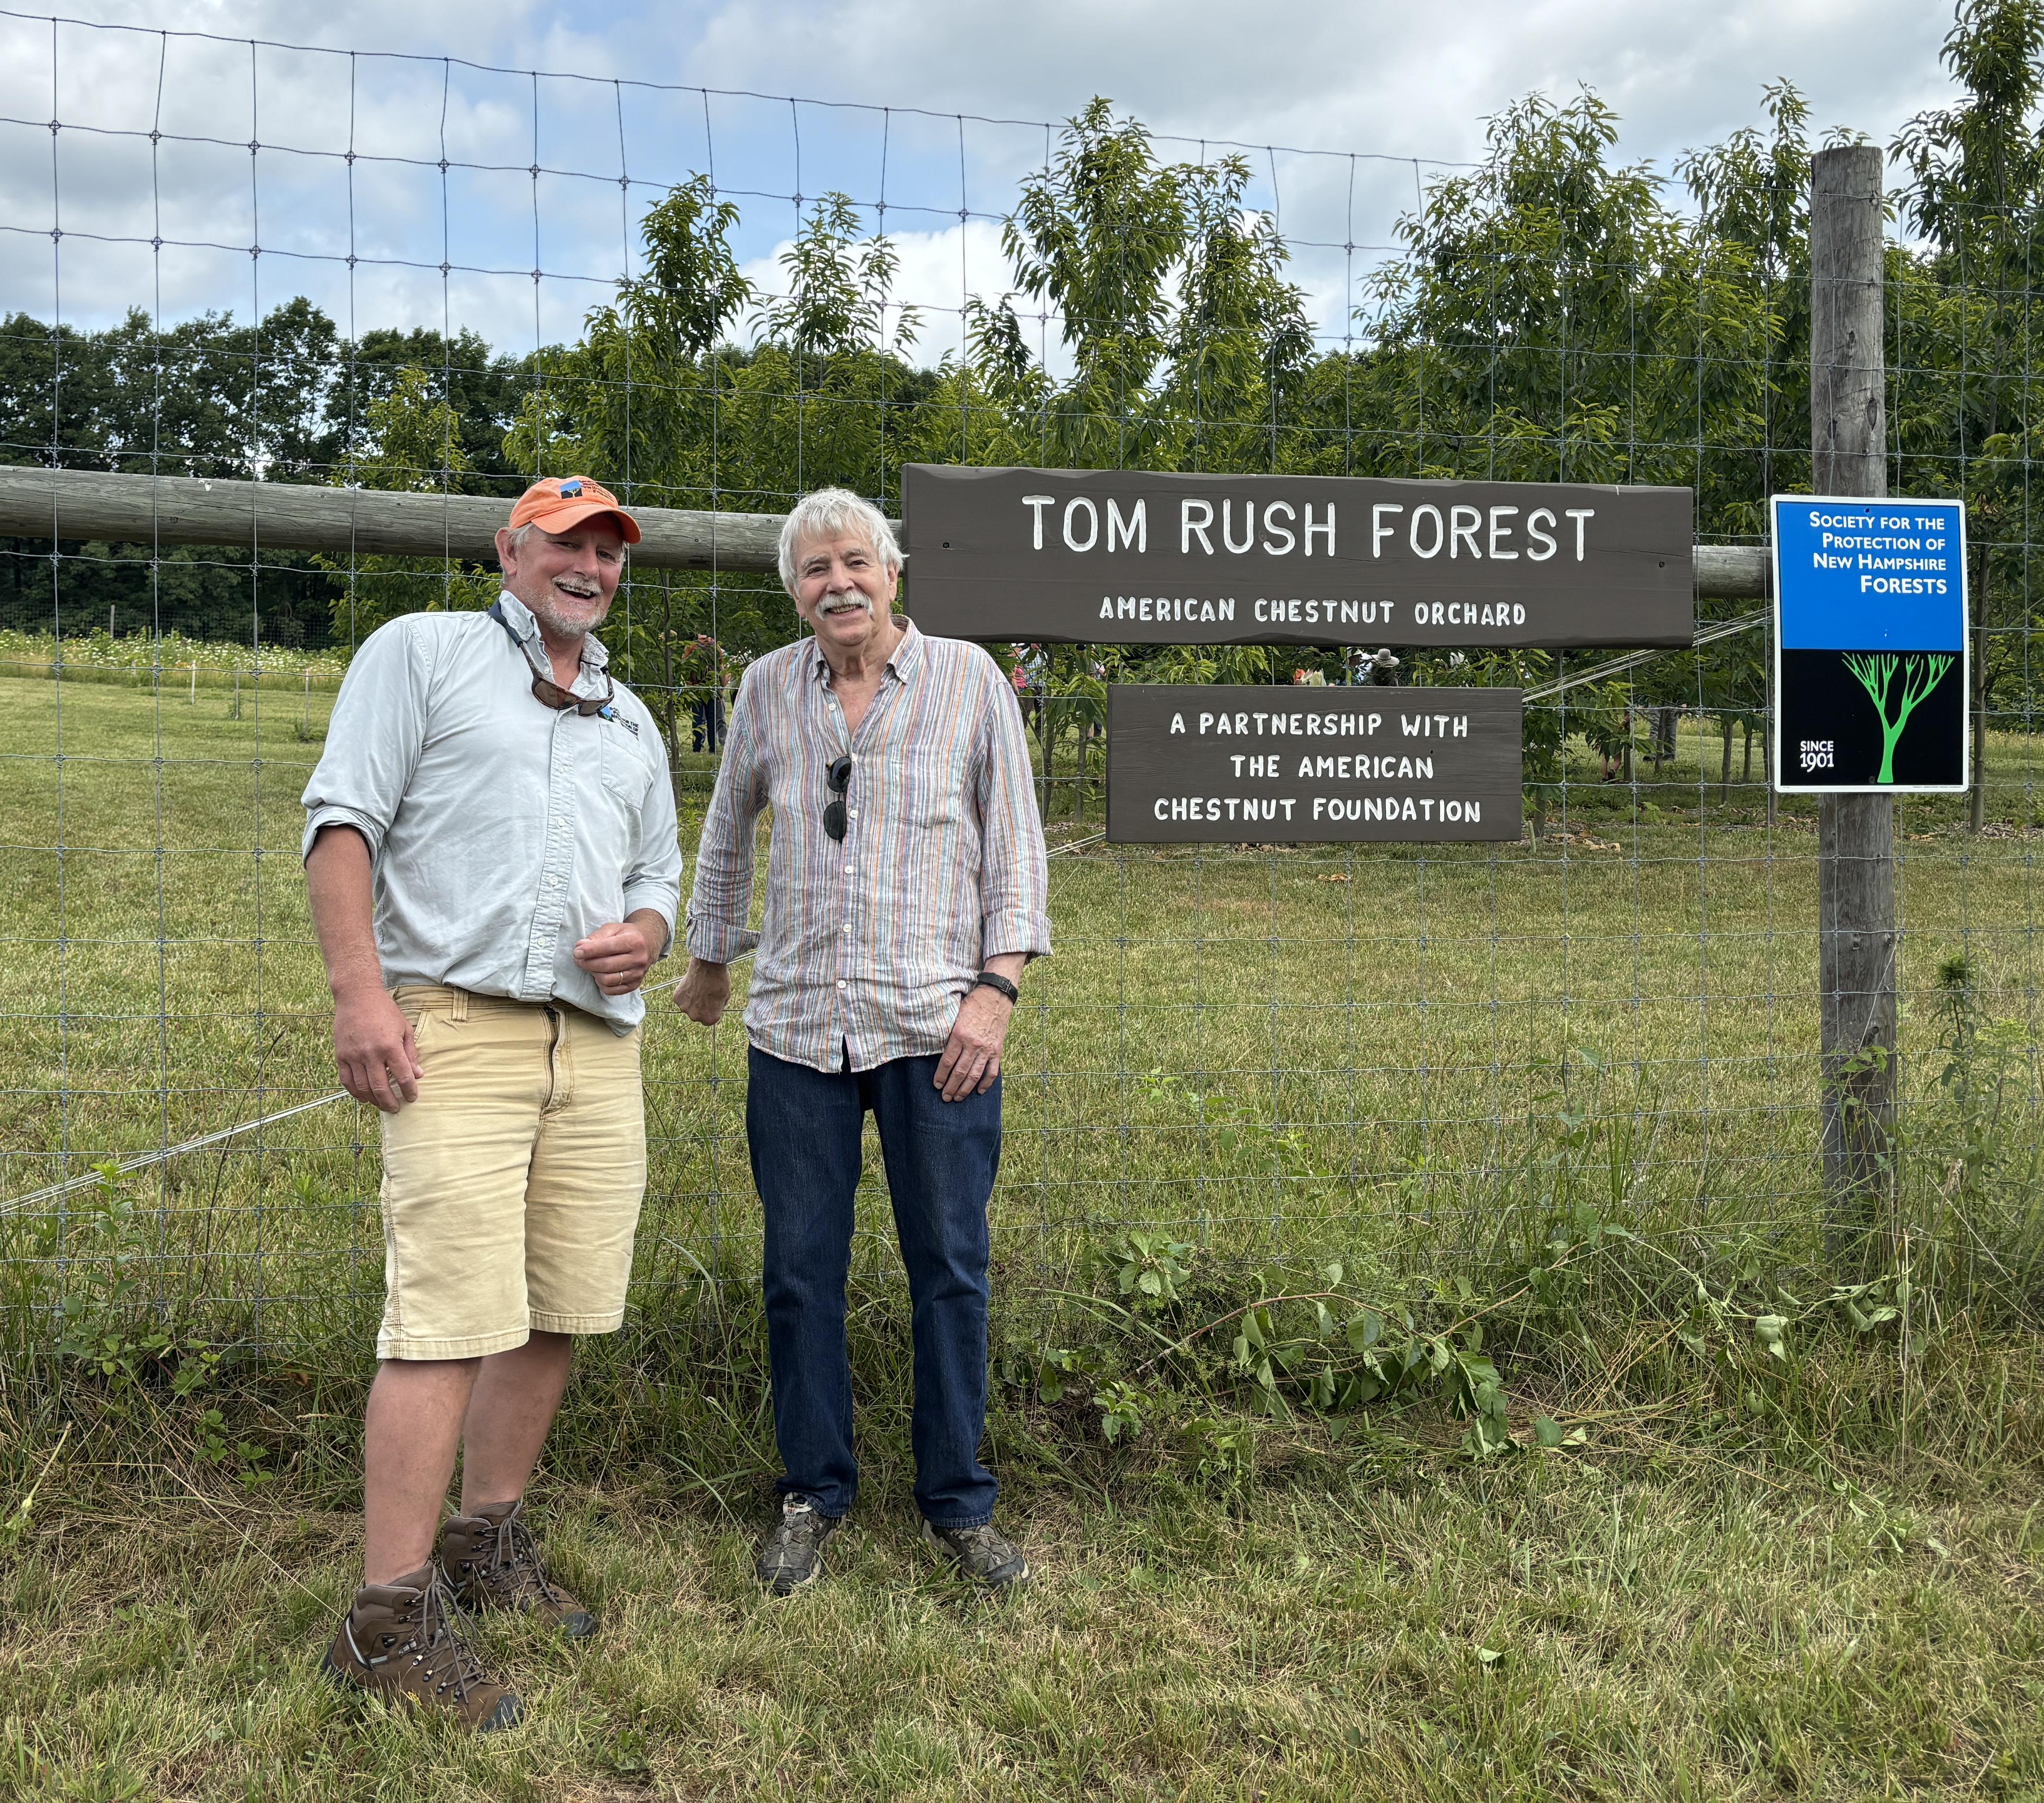 Dave Anderson and Tom Rush pose in front of the Tom Rush Forest.